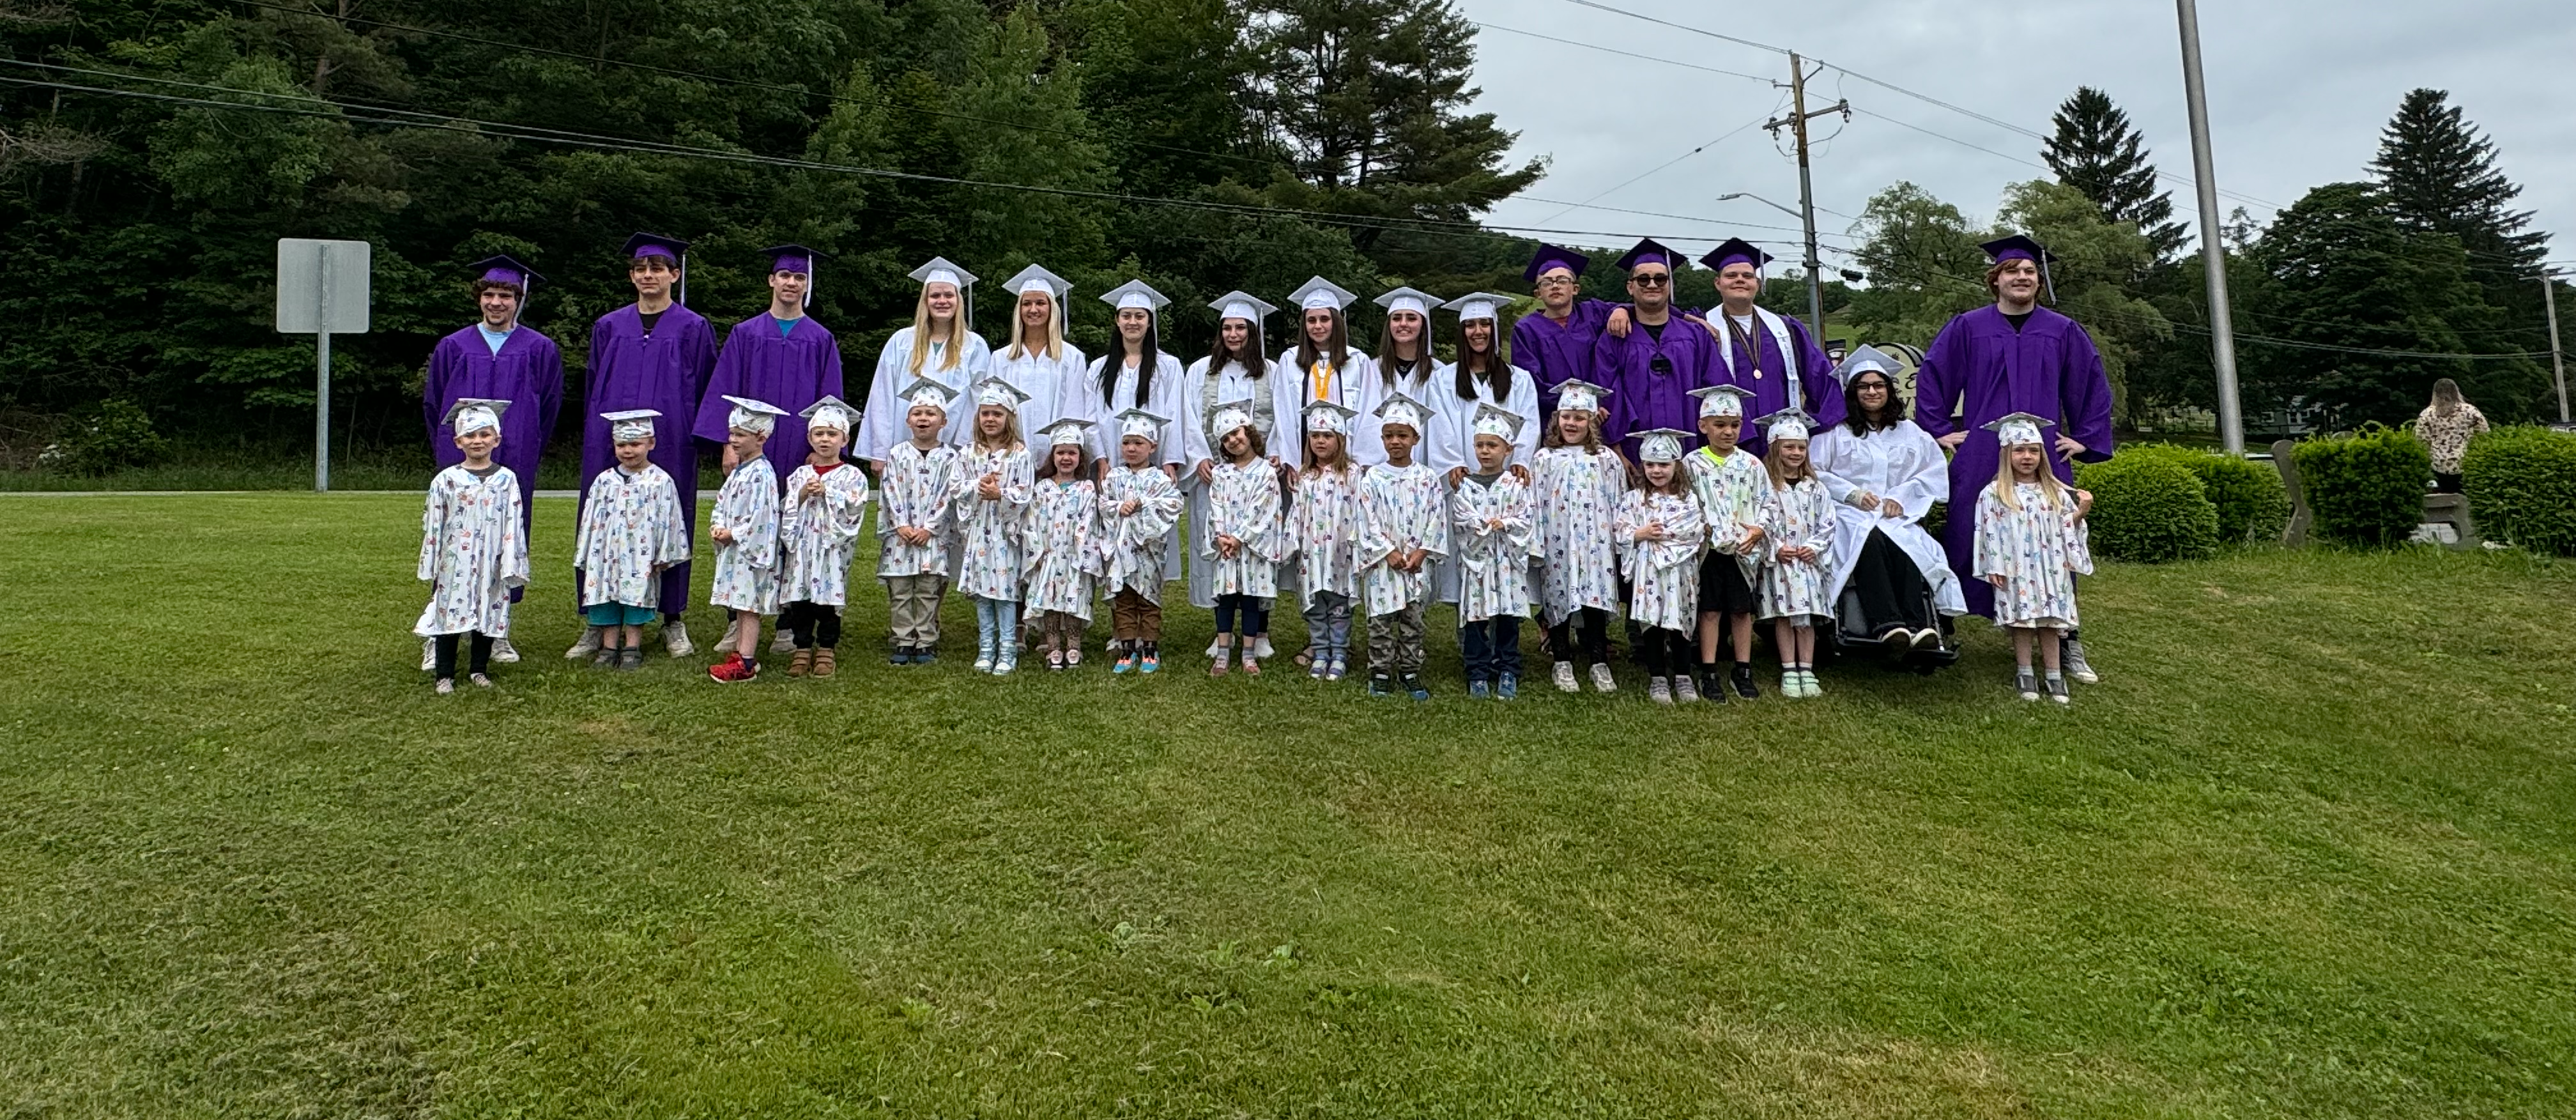 seniors and prek kids standing with cap and gowns